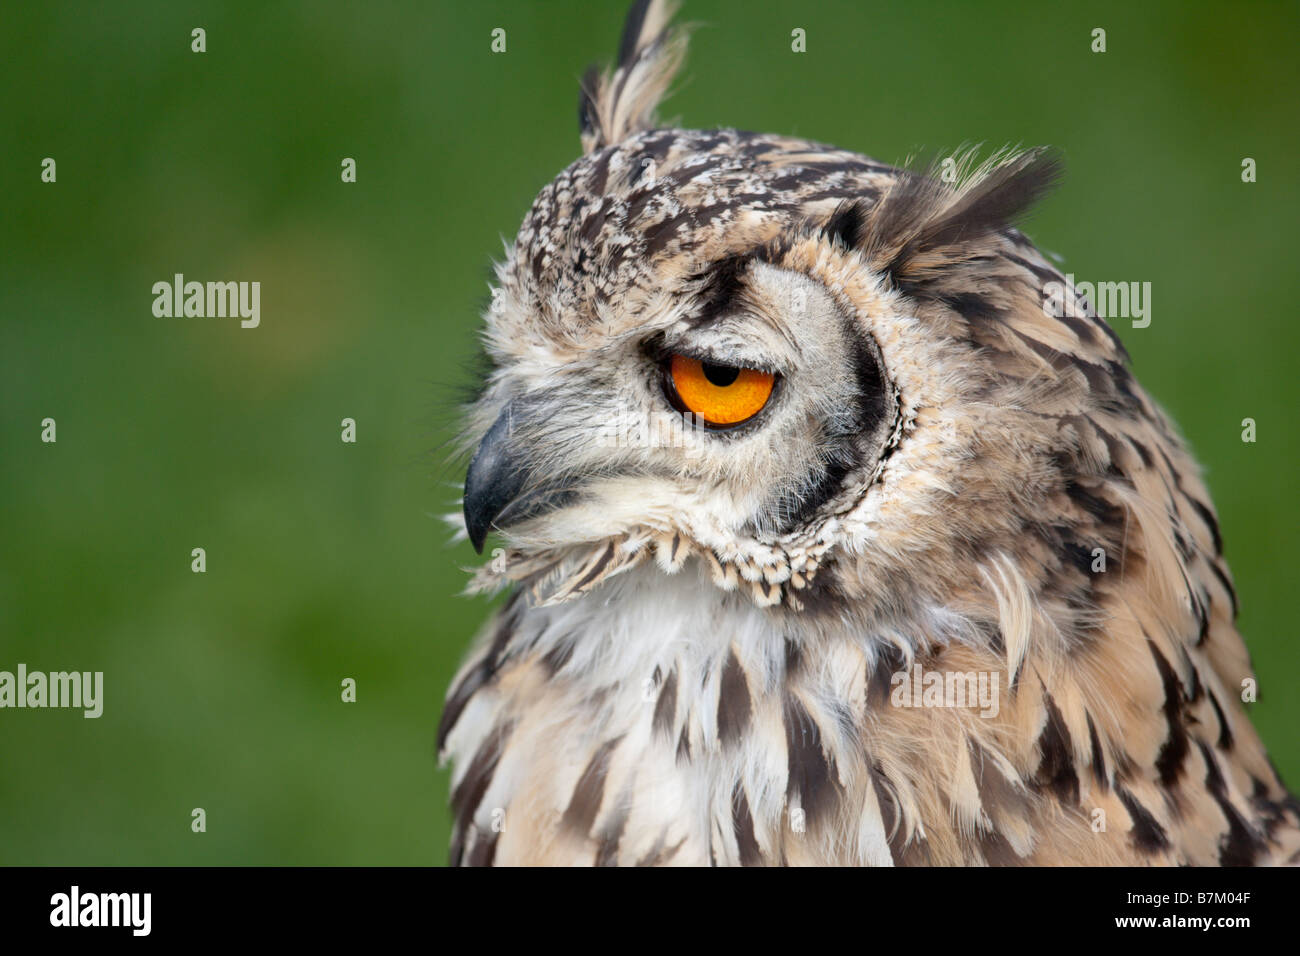 Bengalese Eagle owl with eye half closed Stock Photo